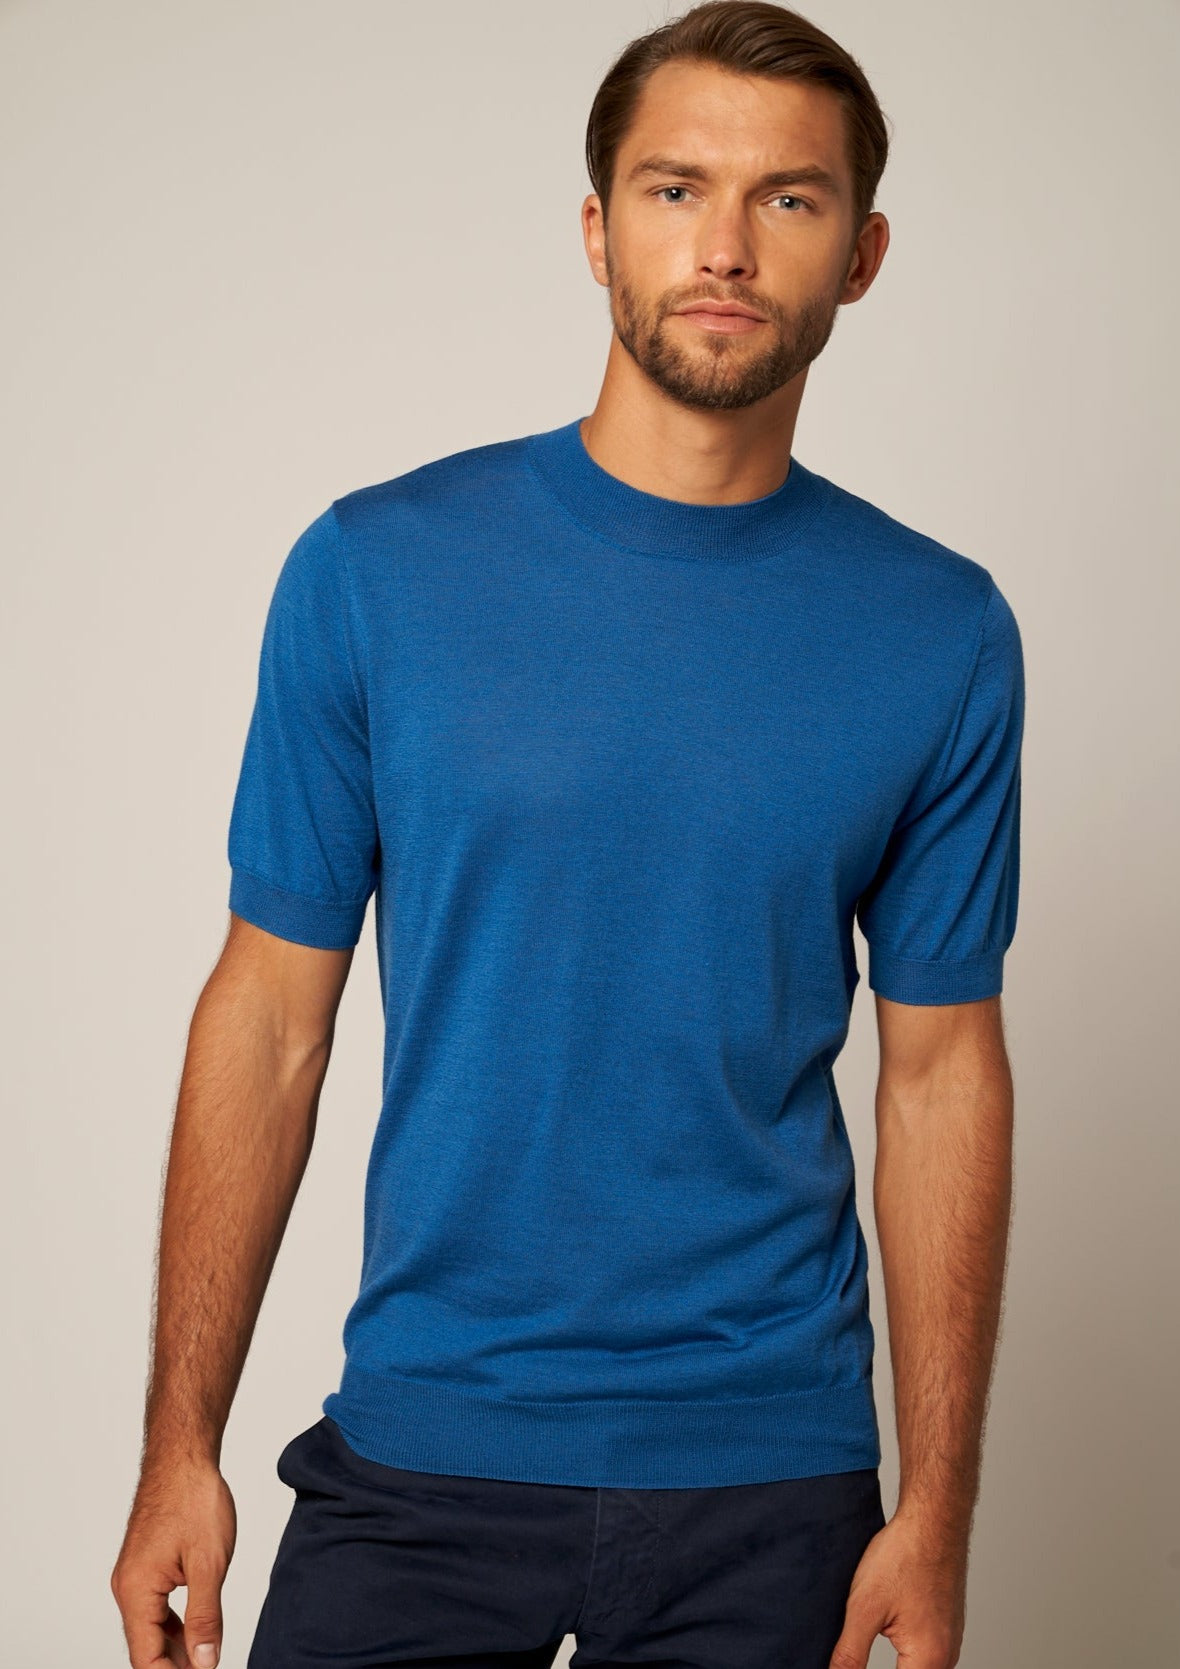 Silk Cashmere High Neck Short Sleeve Tee | Blue | Bellemere New York | 100% Cashmere Sustainable